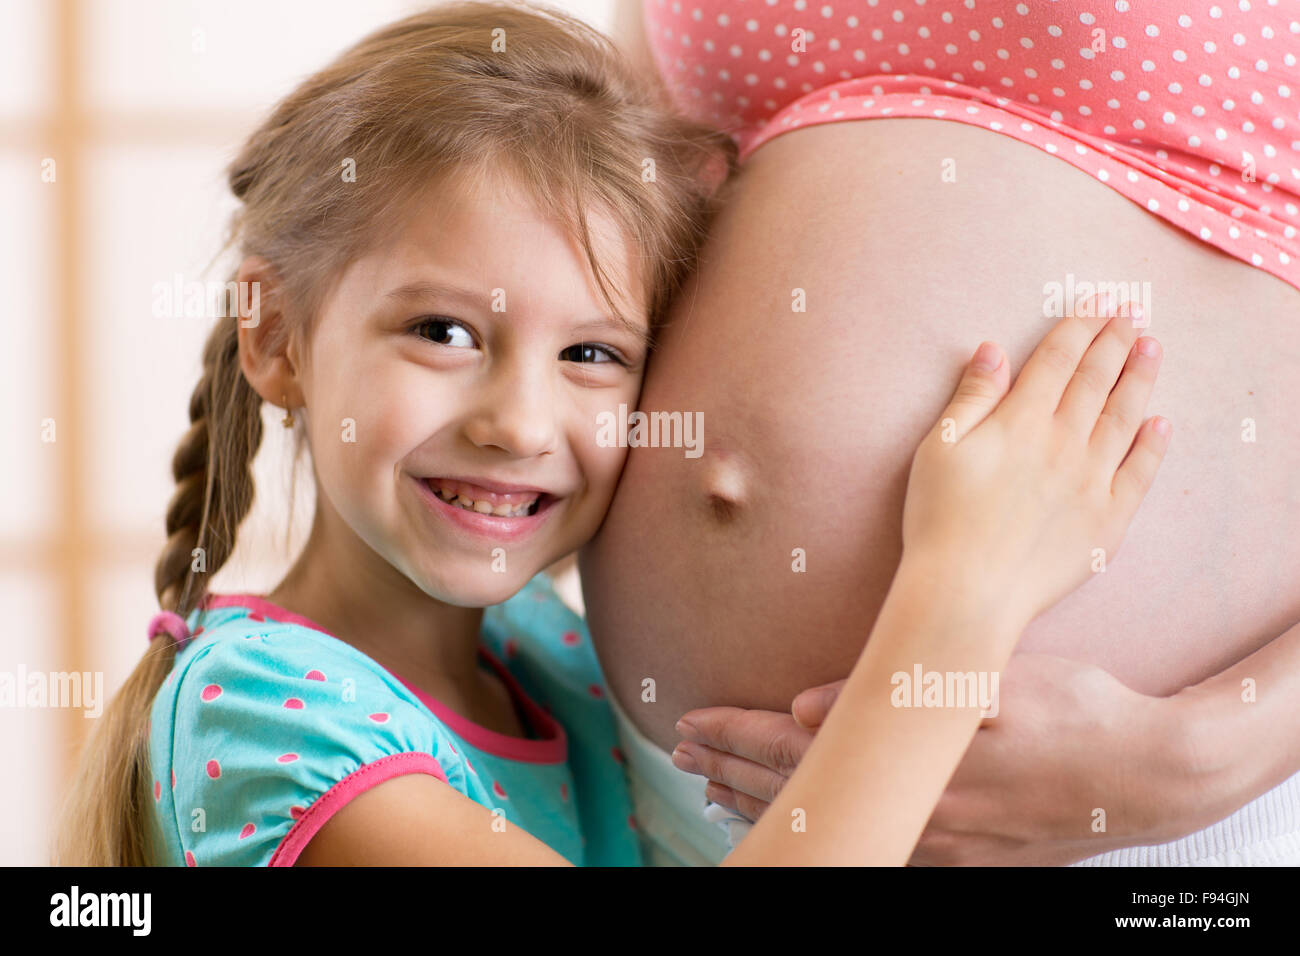 A happy family. Child girl hugs belly of her pregnant mother Stock Photo